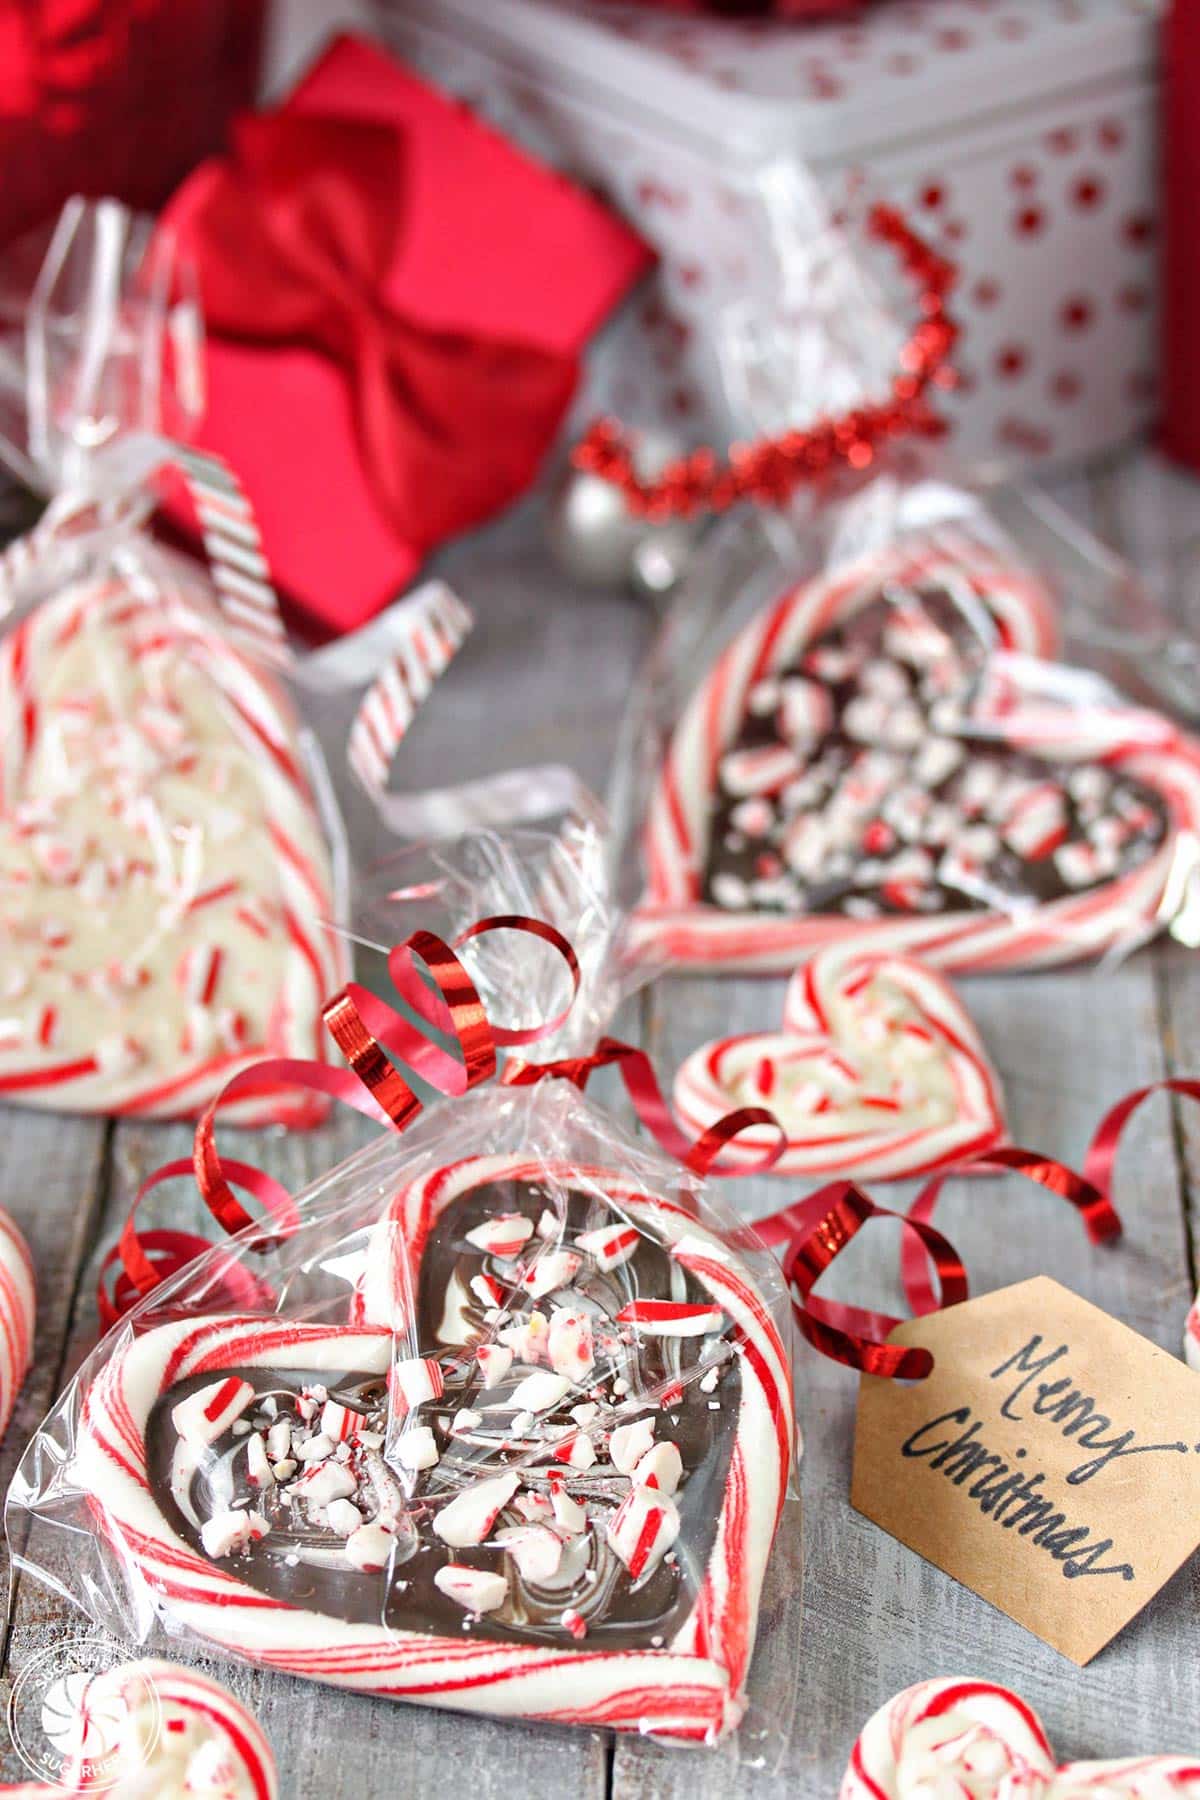 Candy Cane Hearts wrapped in cellophane, with ribbons and gift tags attached.